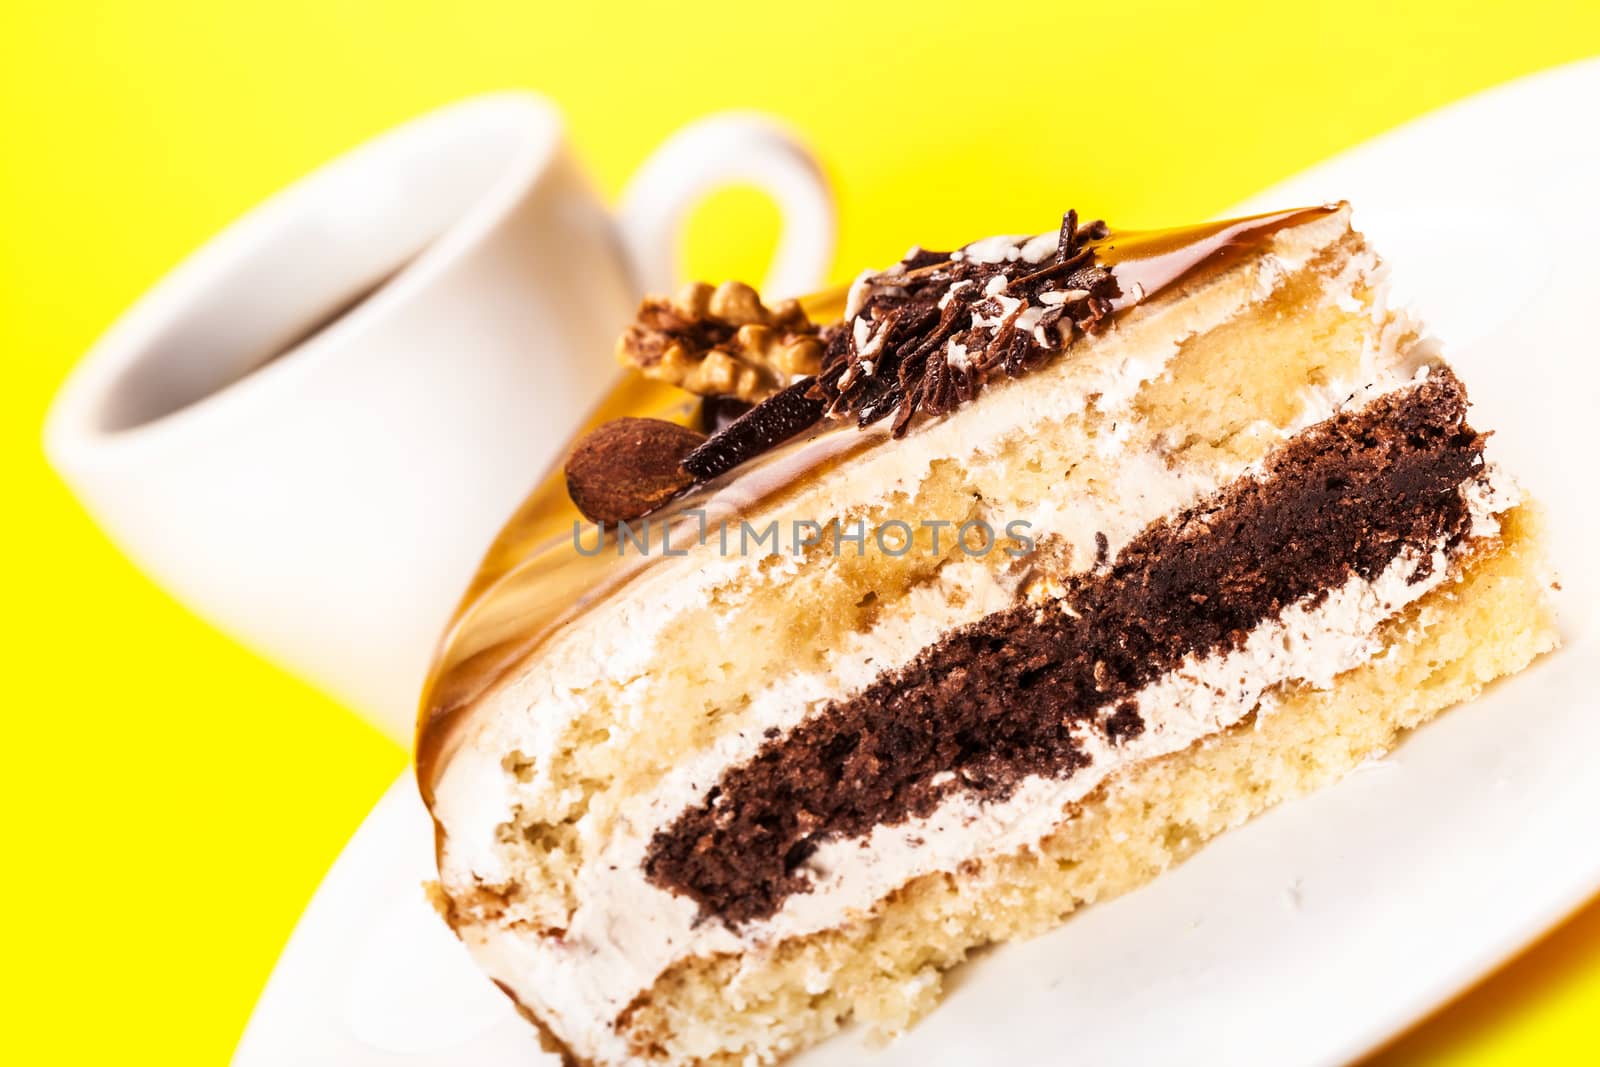 piece of cake and a cup of coffee on a yellow background